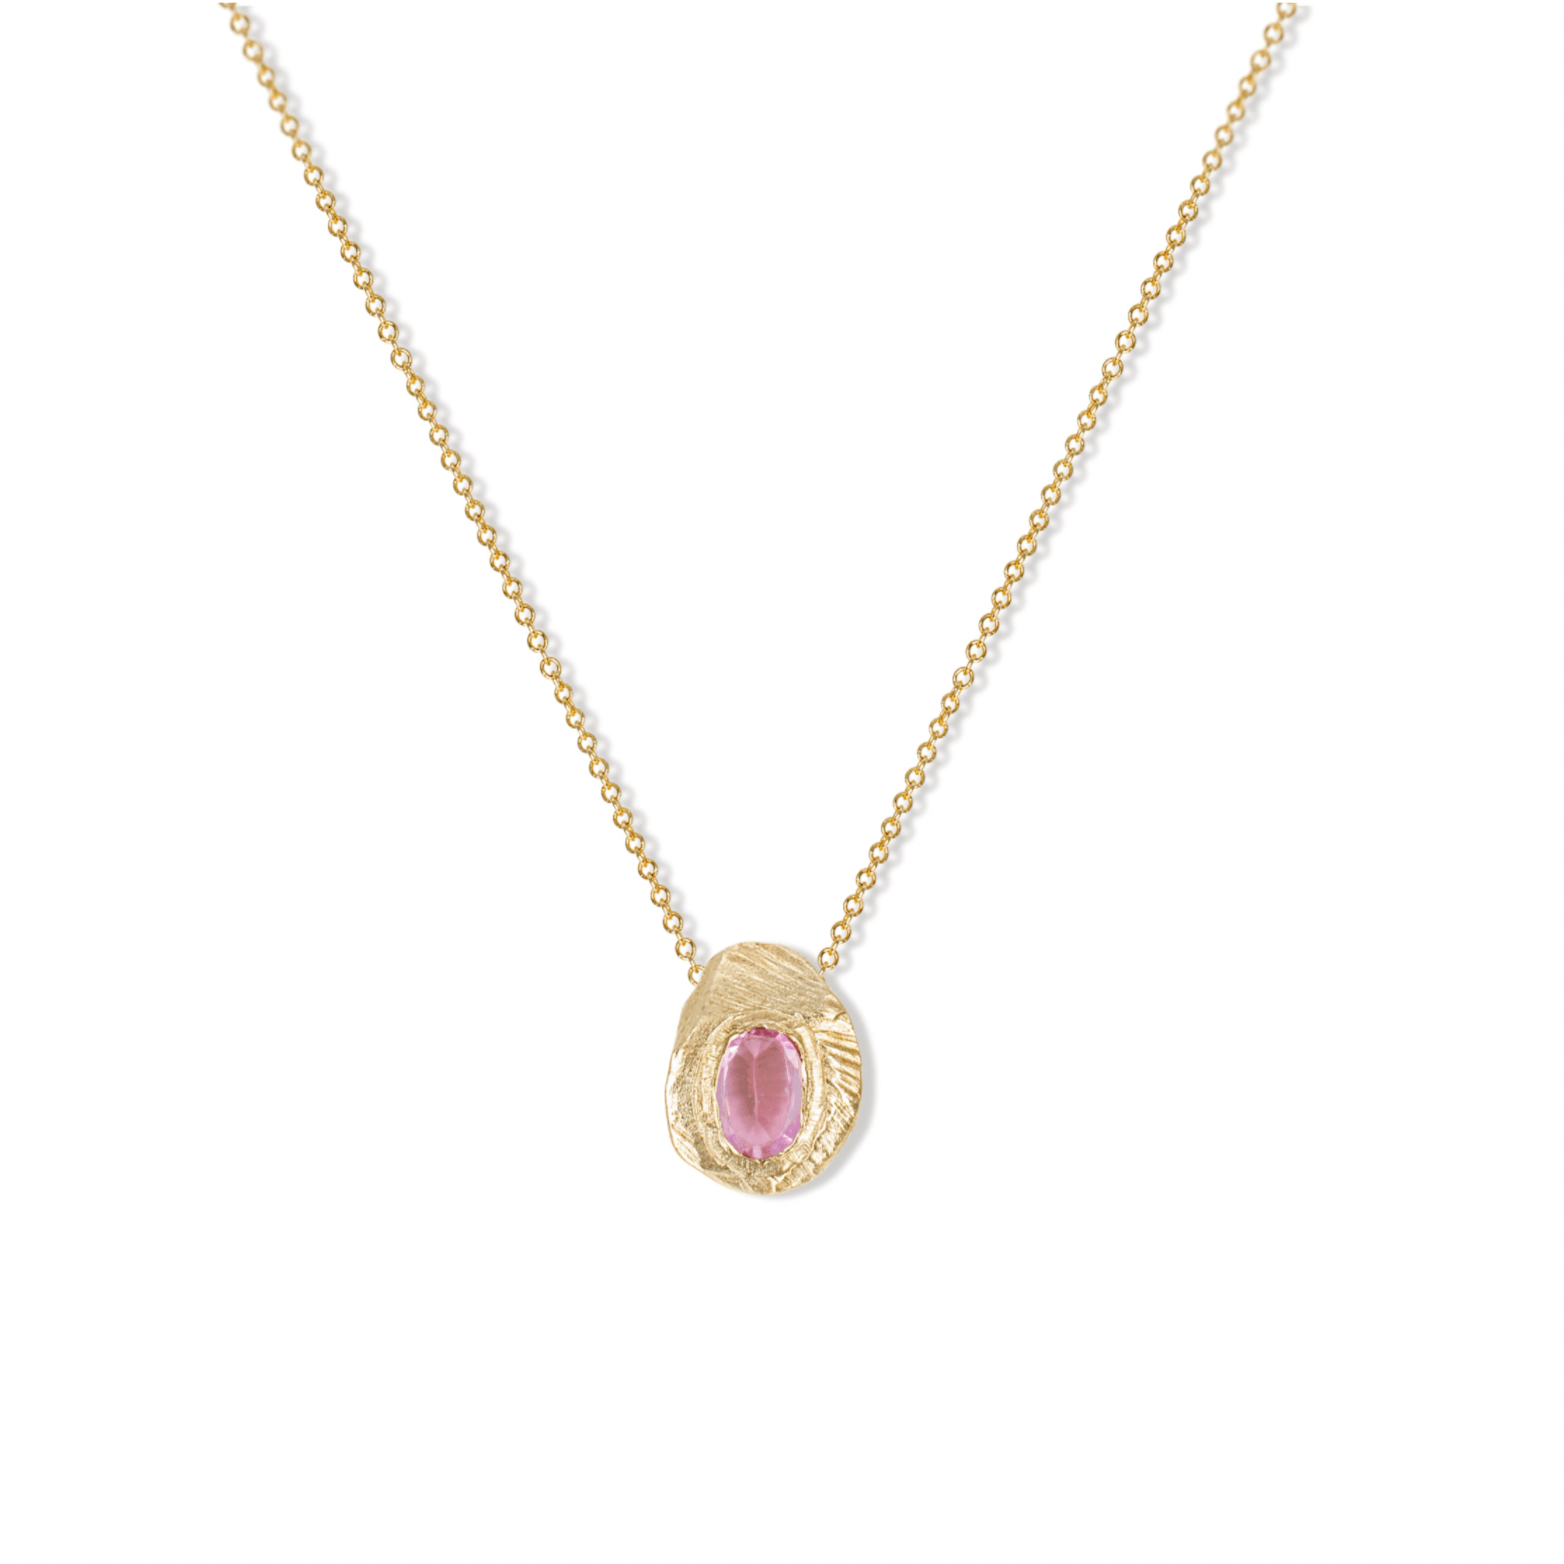 Handmade necklace in 18kt gold with an oval ruby